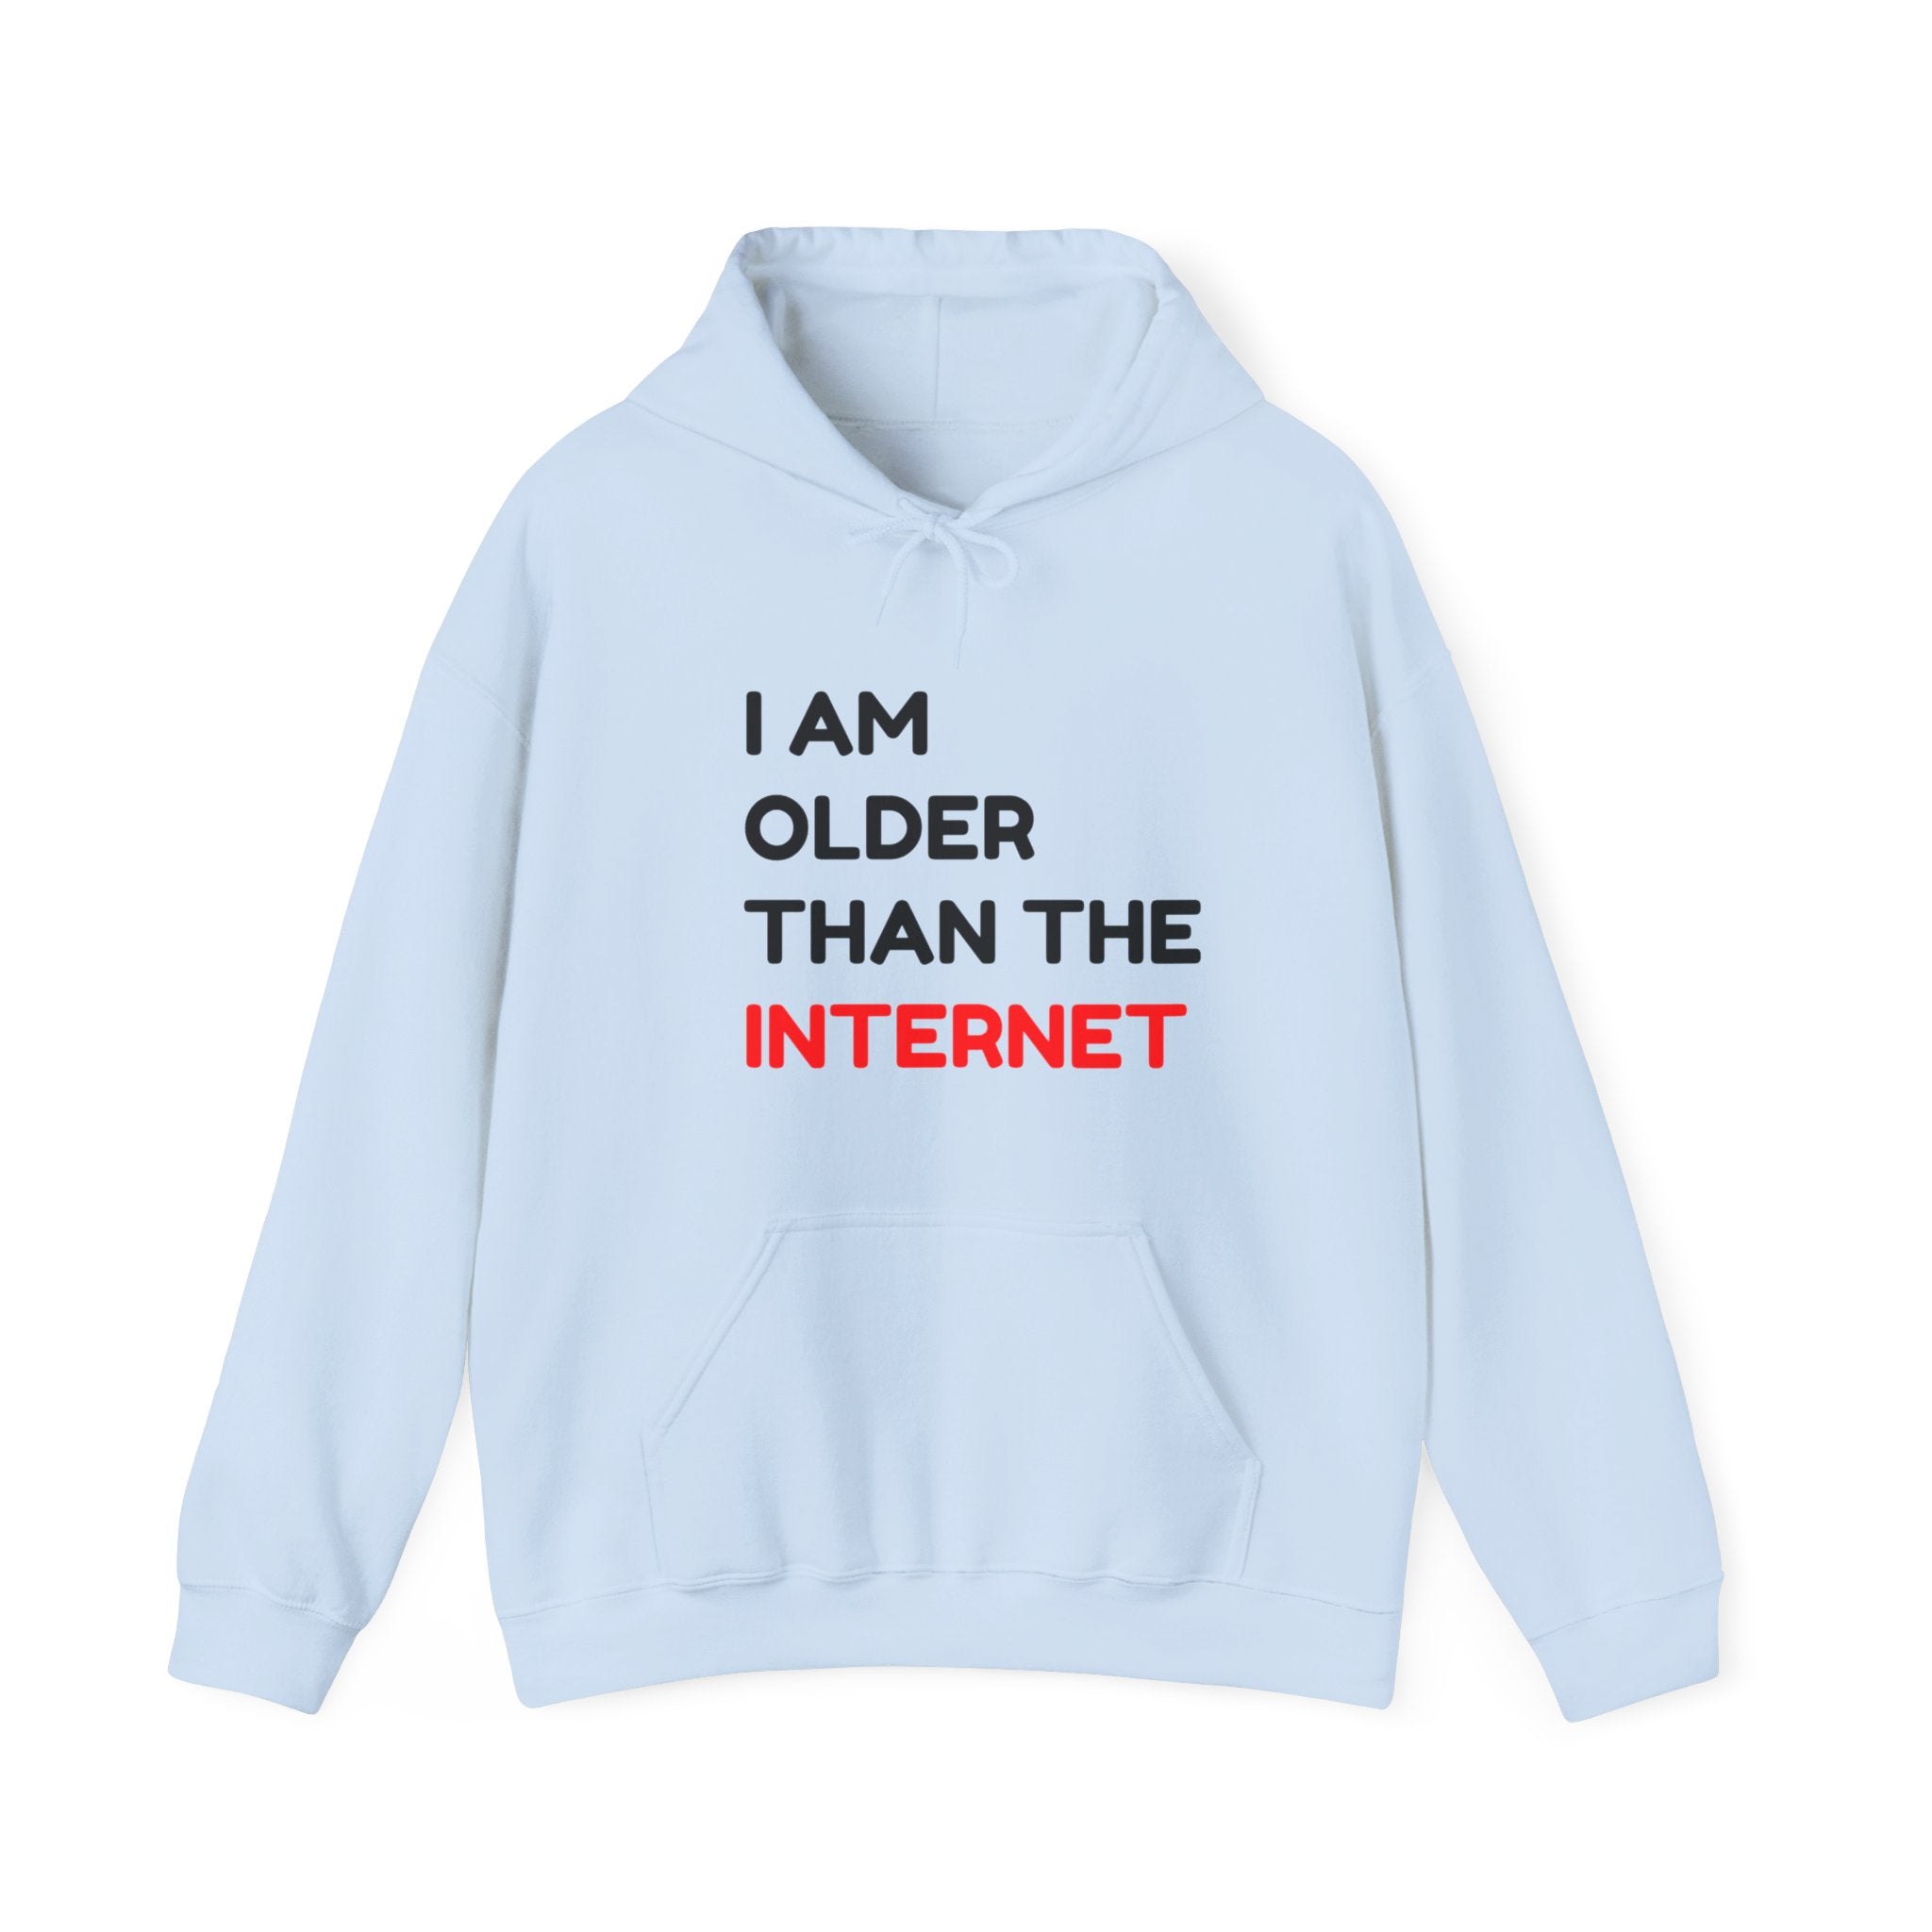 A light blue, cozy I am Older Than the Internet - Hooded Sweatshirt with the text "I AM OLDER THAN THE INTERNET" printed in black and red on the front.